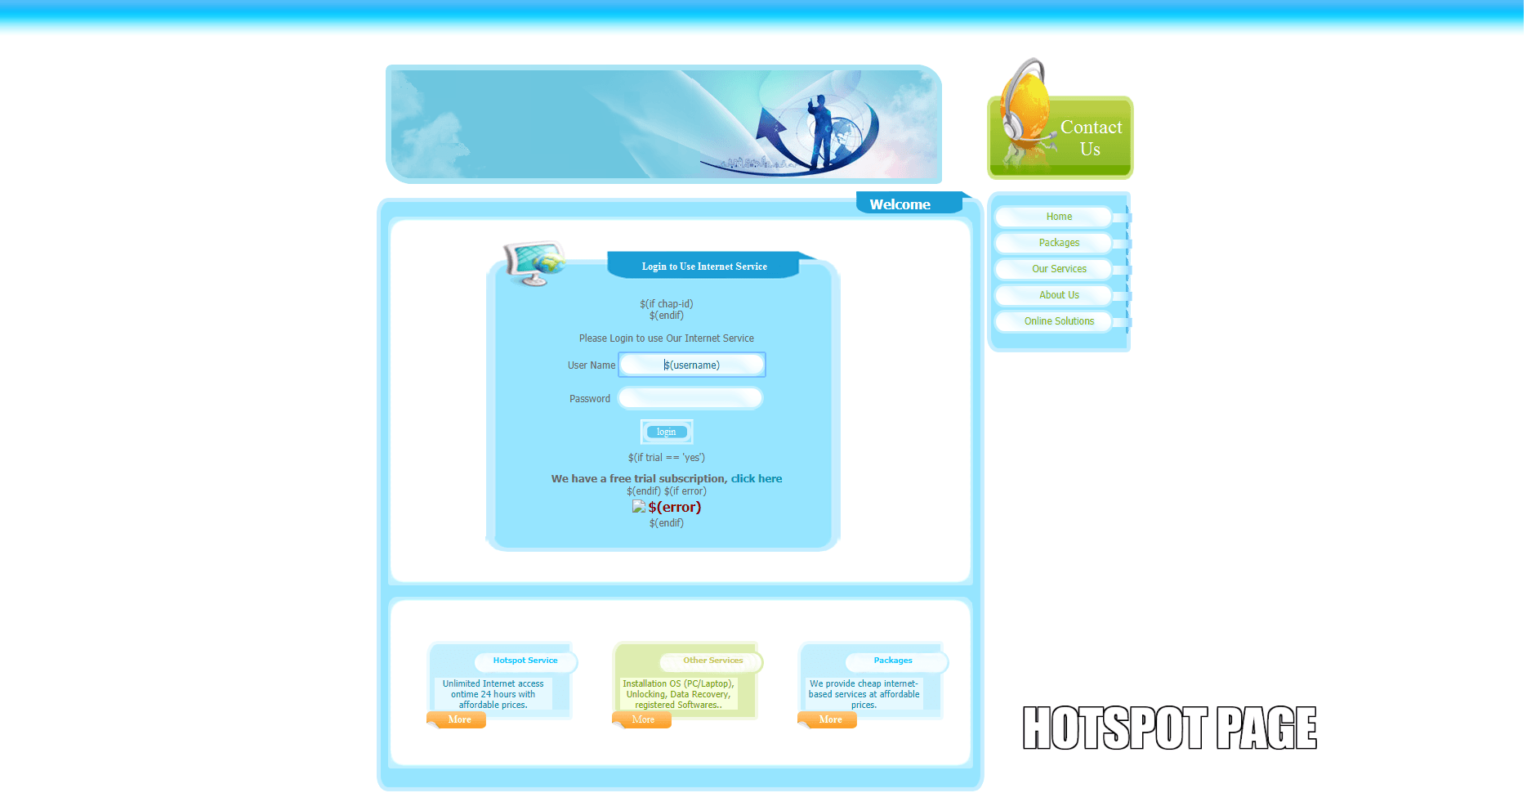 Mikrotik Hotspot Login Page Template Responsive Free Download It Home